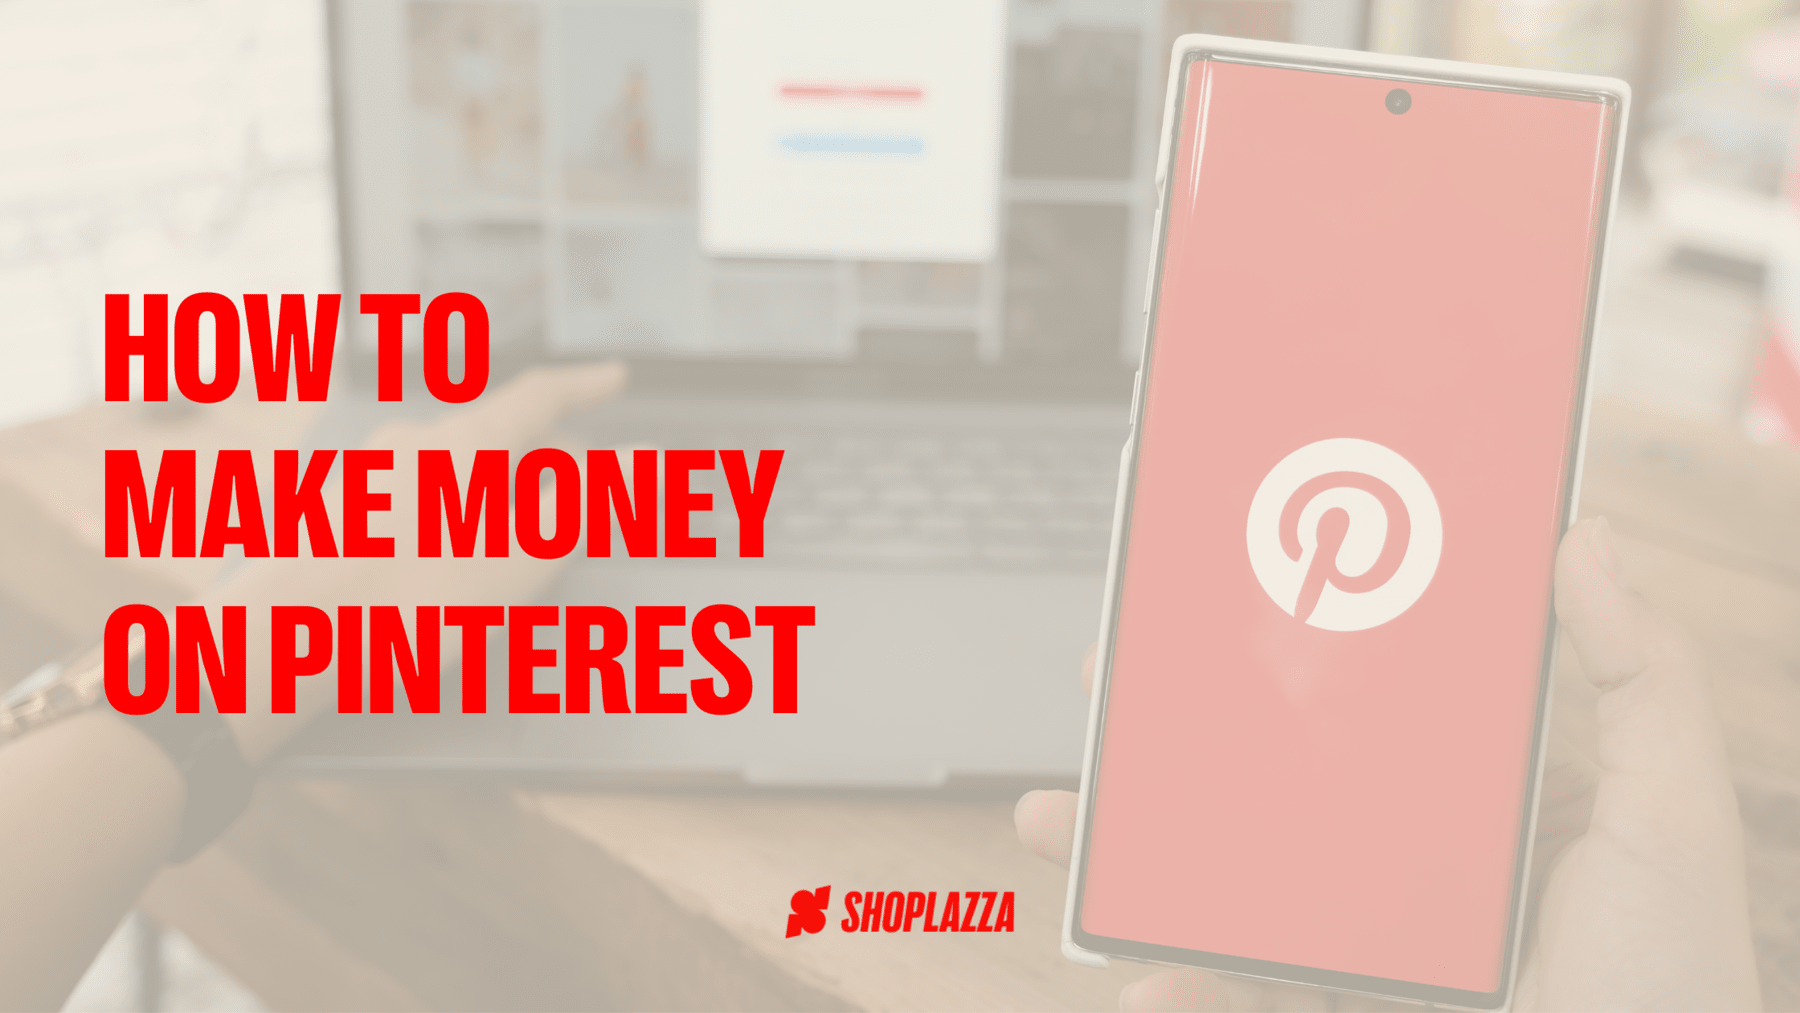 How to Make Money on Pinterest: Everything You Need to Know